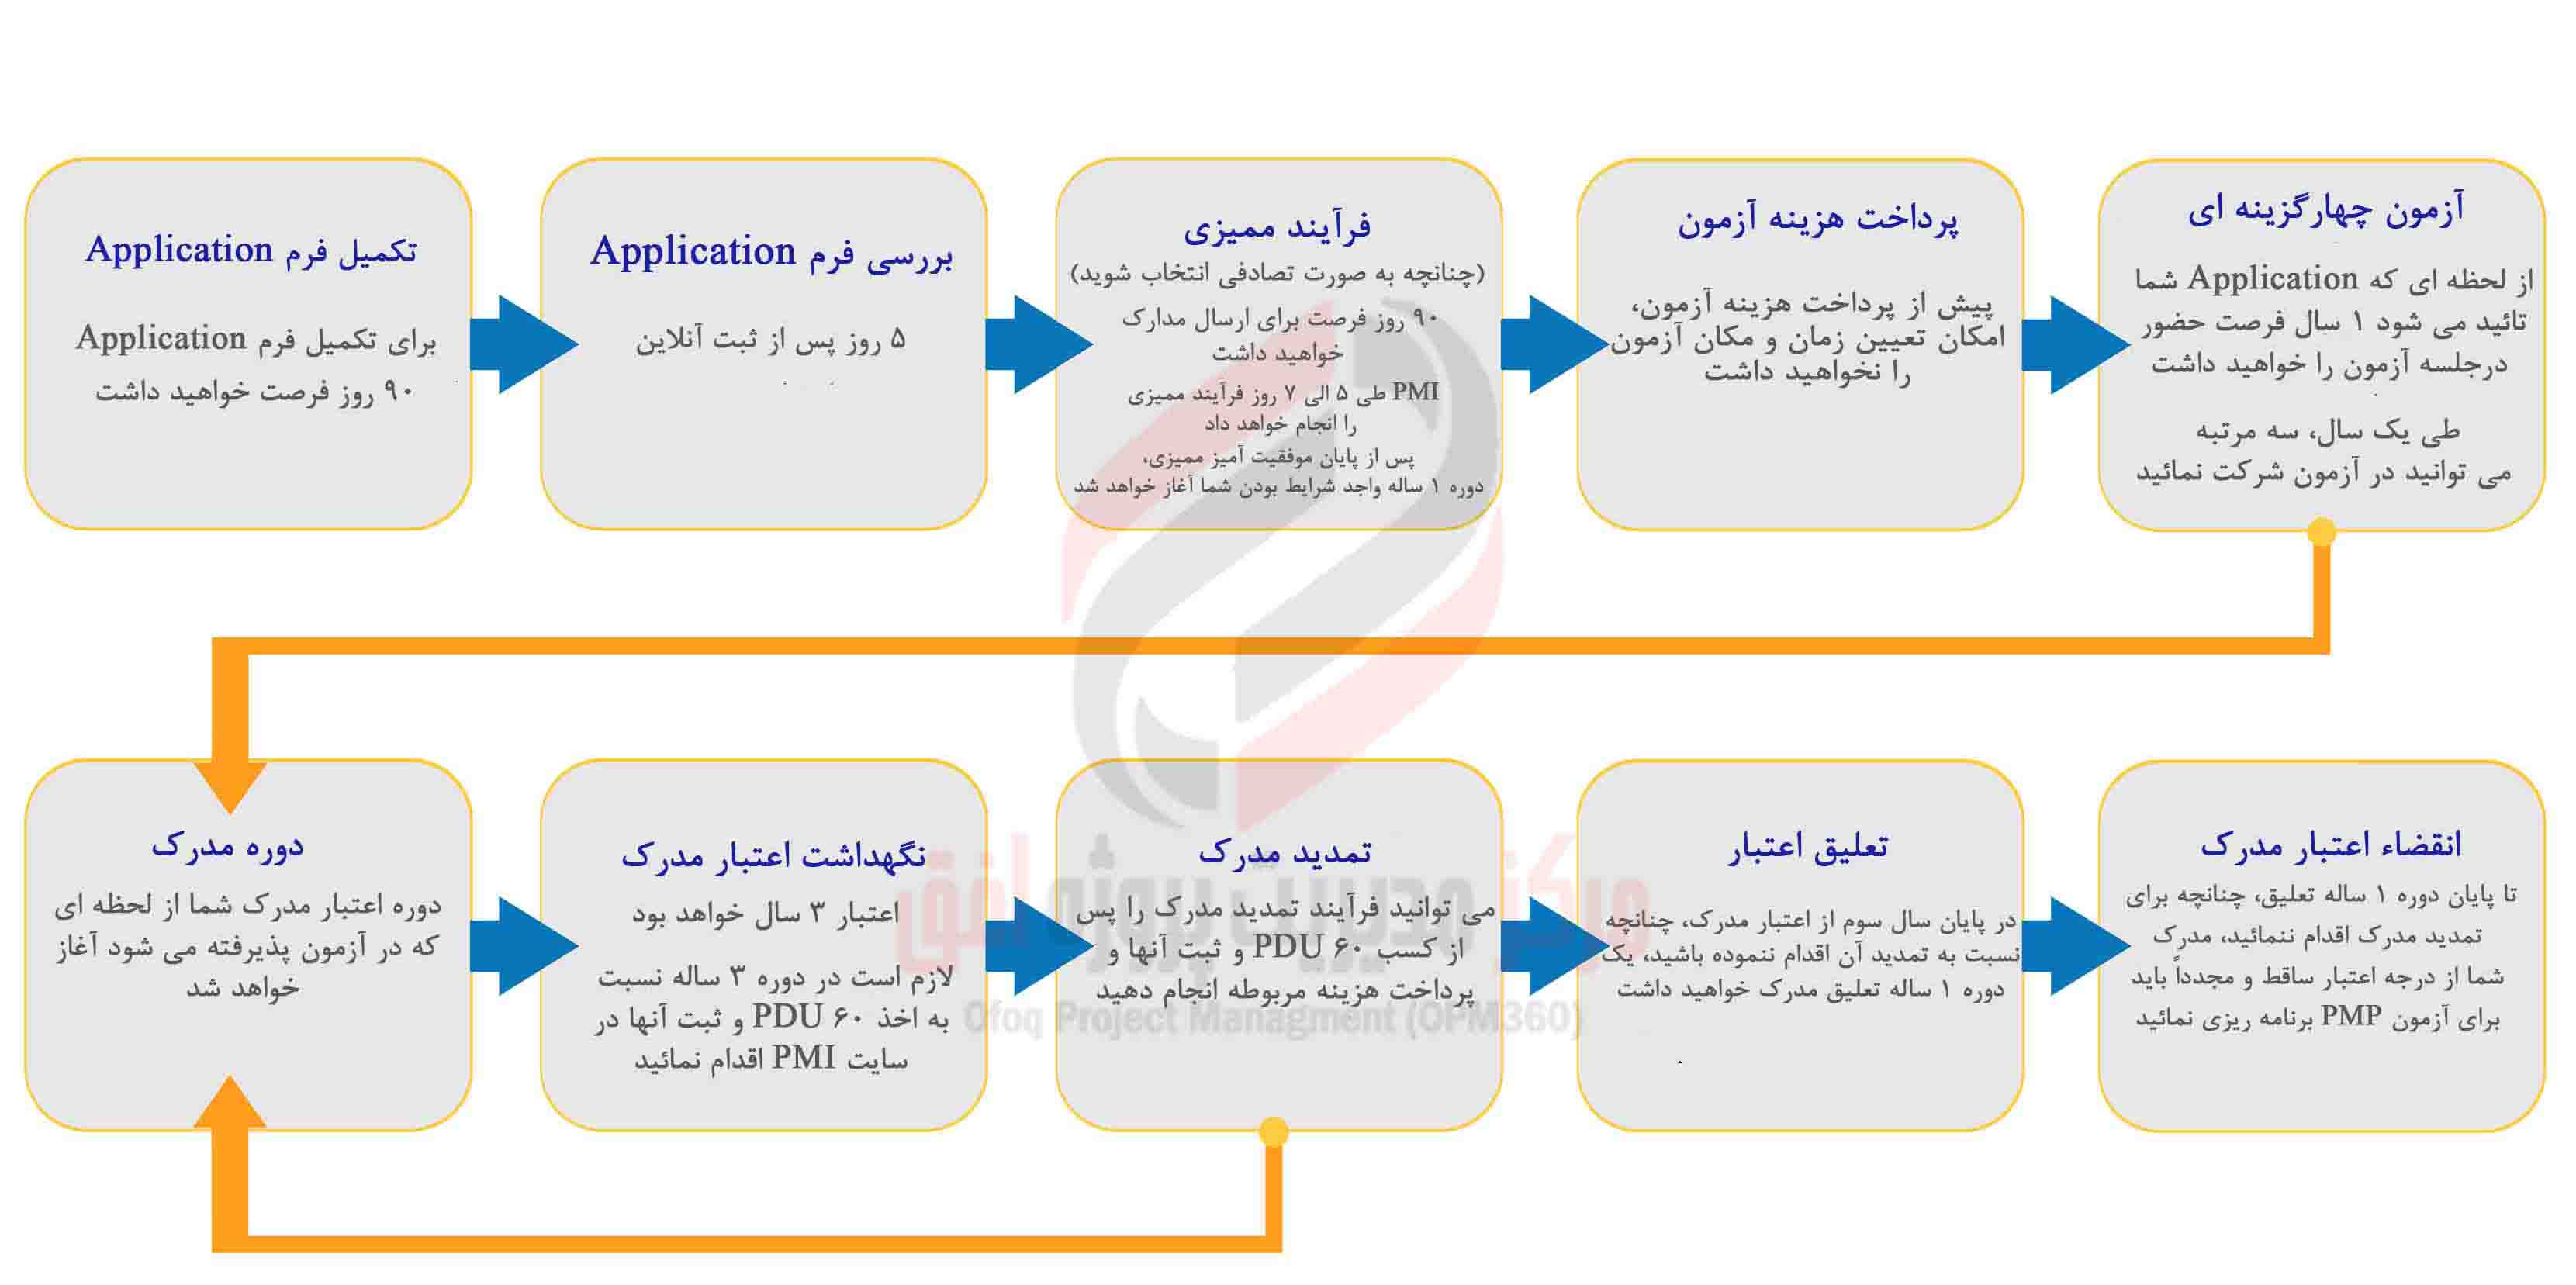 PMP Application form completion Persian